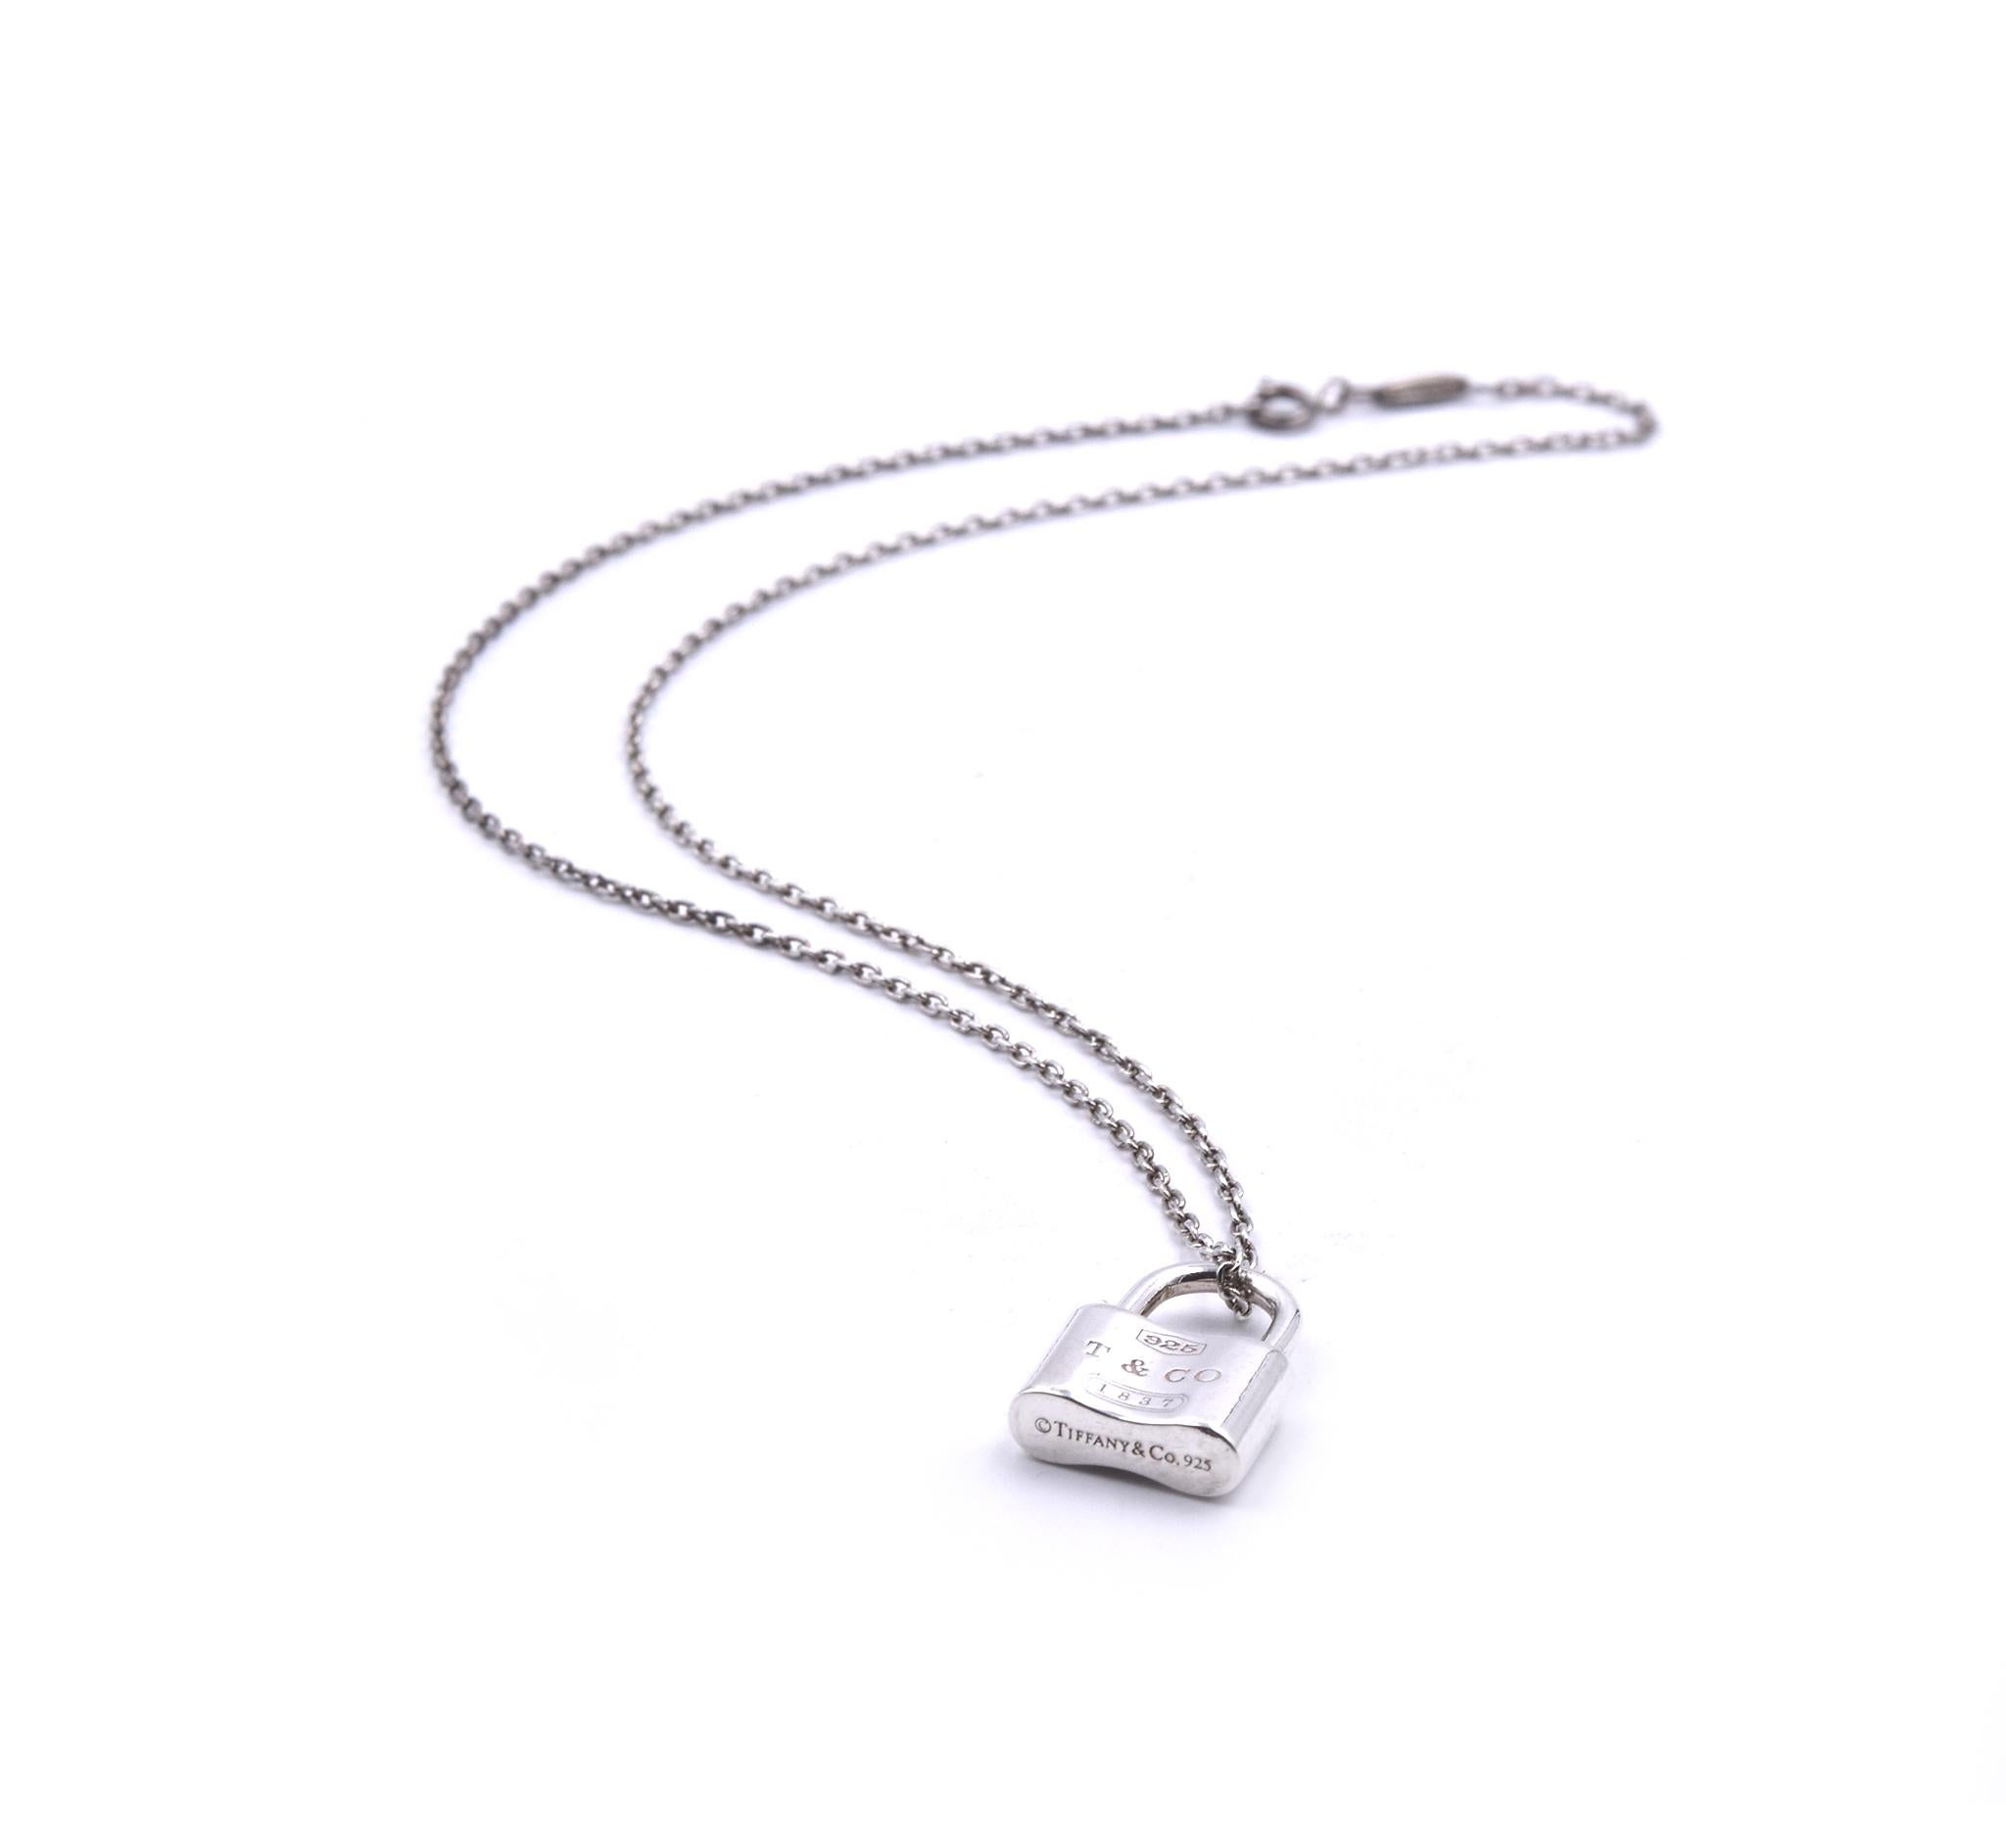 Designer: Tiffany & Co.
Material: sterling silver
Dimensions: necklace is 18-inches long and lock is 20.49mm by 14.50mm
Weight: 9.82 grams
